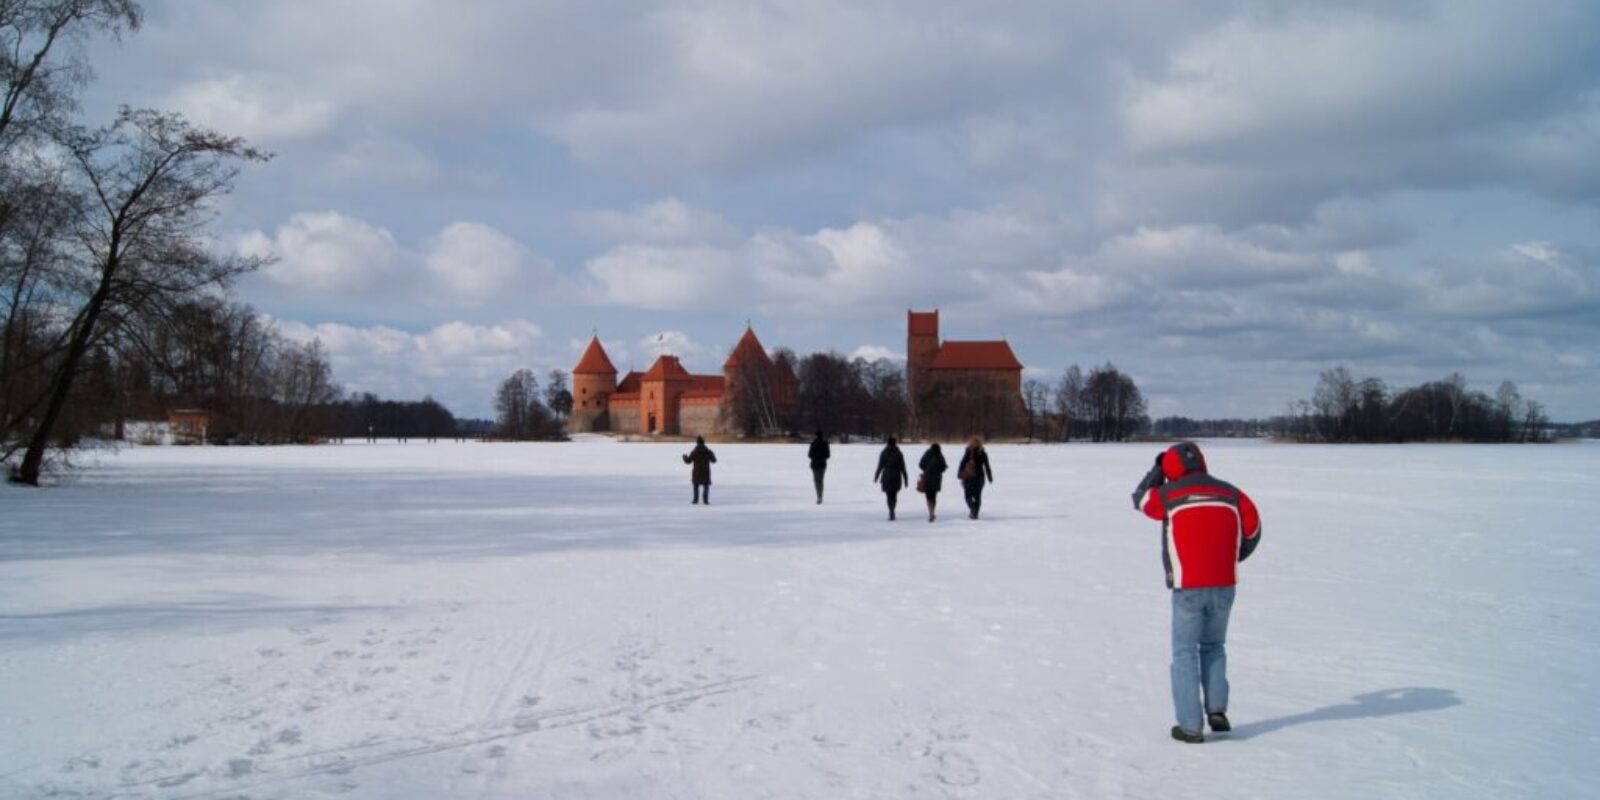 An image of the Trakai Frozen Lake, one of the locations in senior trips to Lithuania.